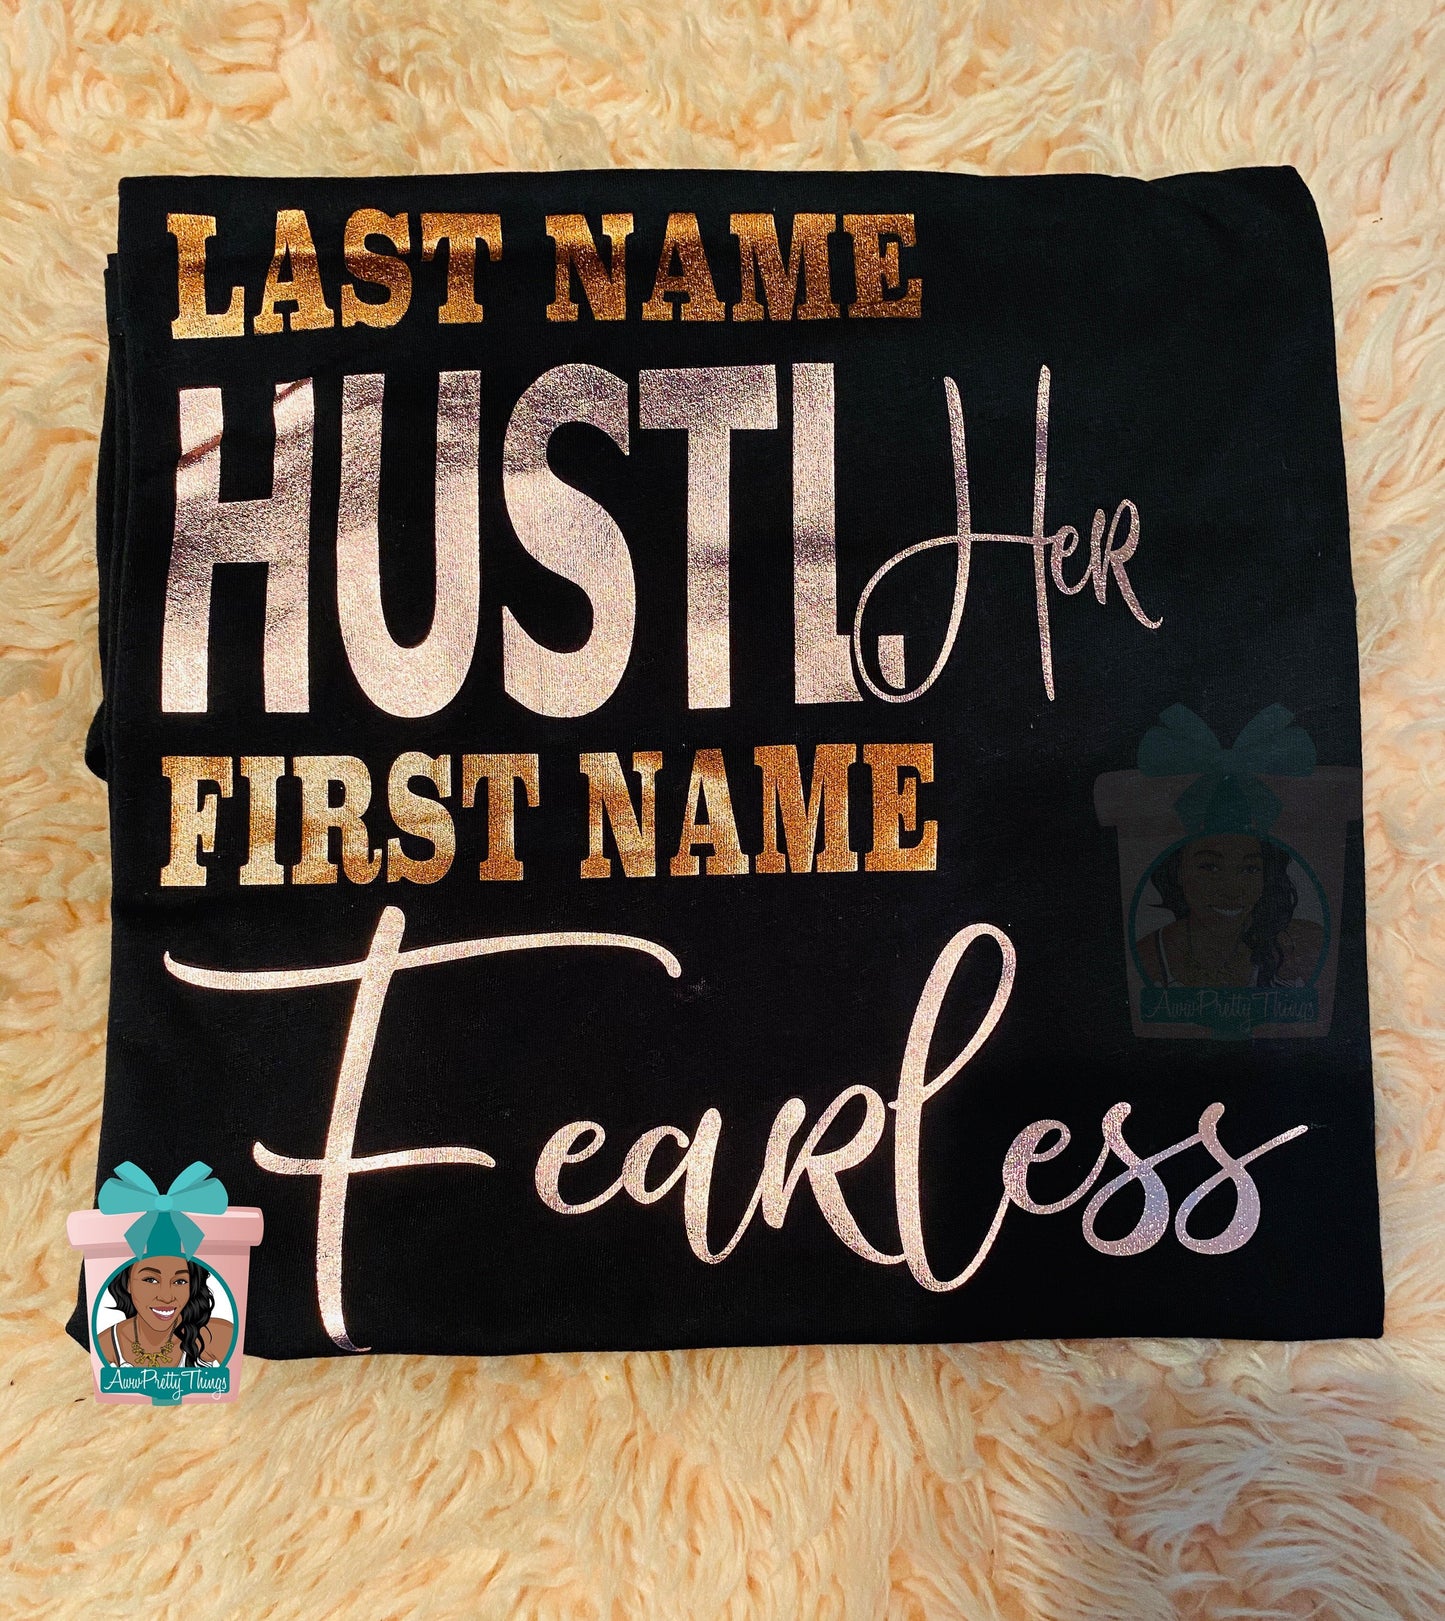 Last Name HustlHer First Name Fearless Shirt